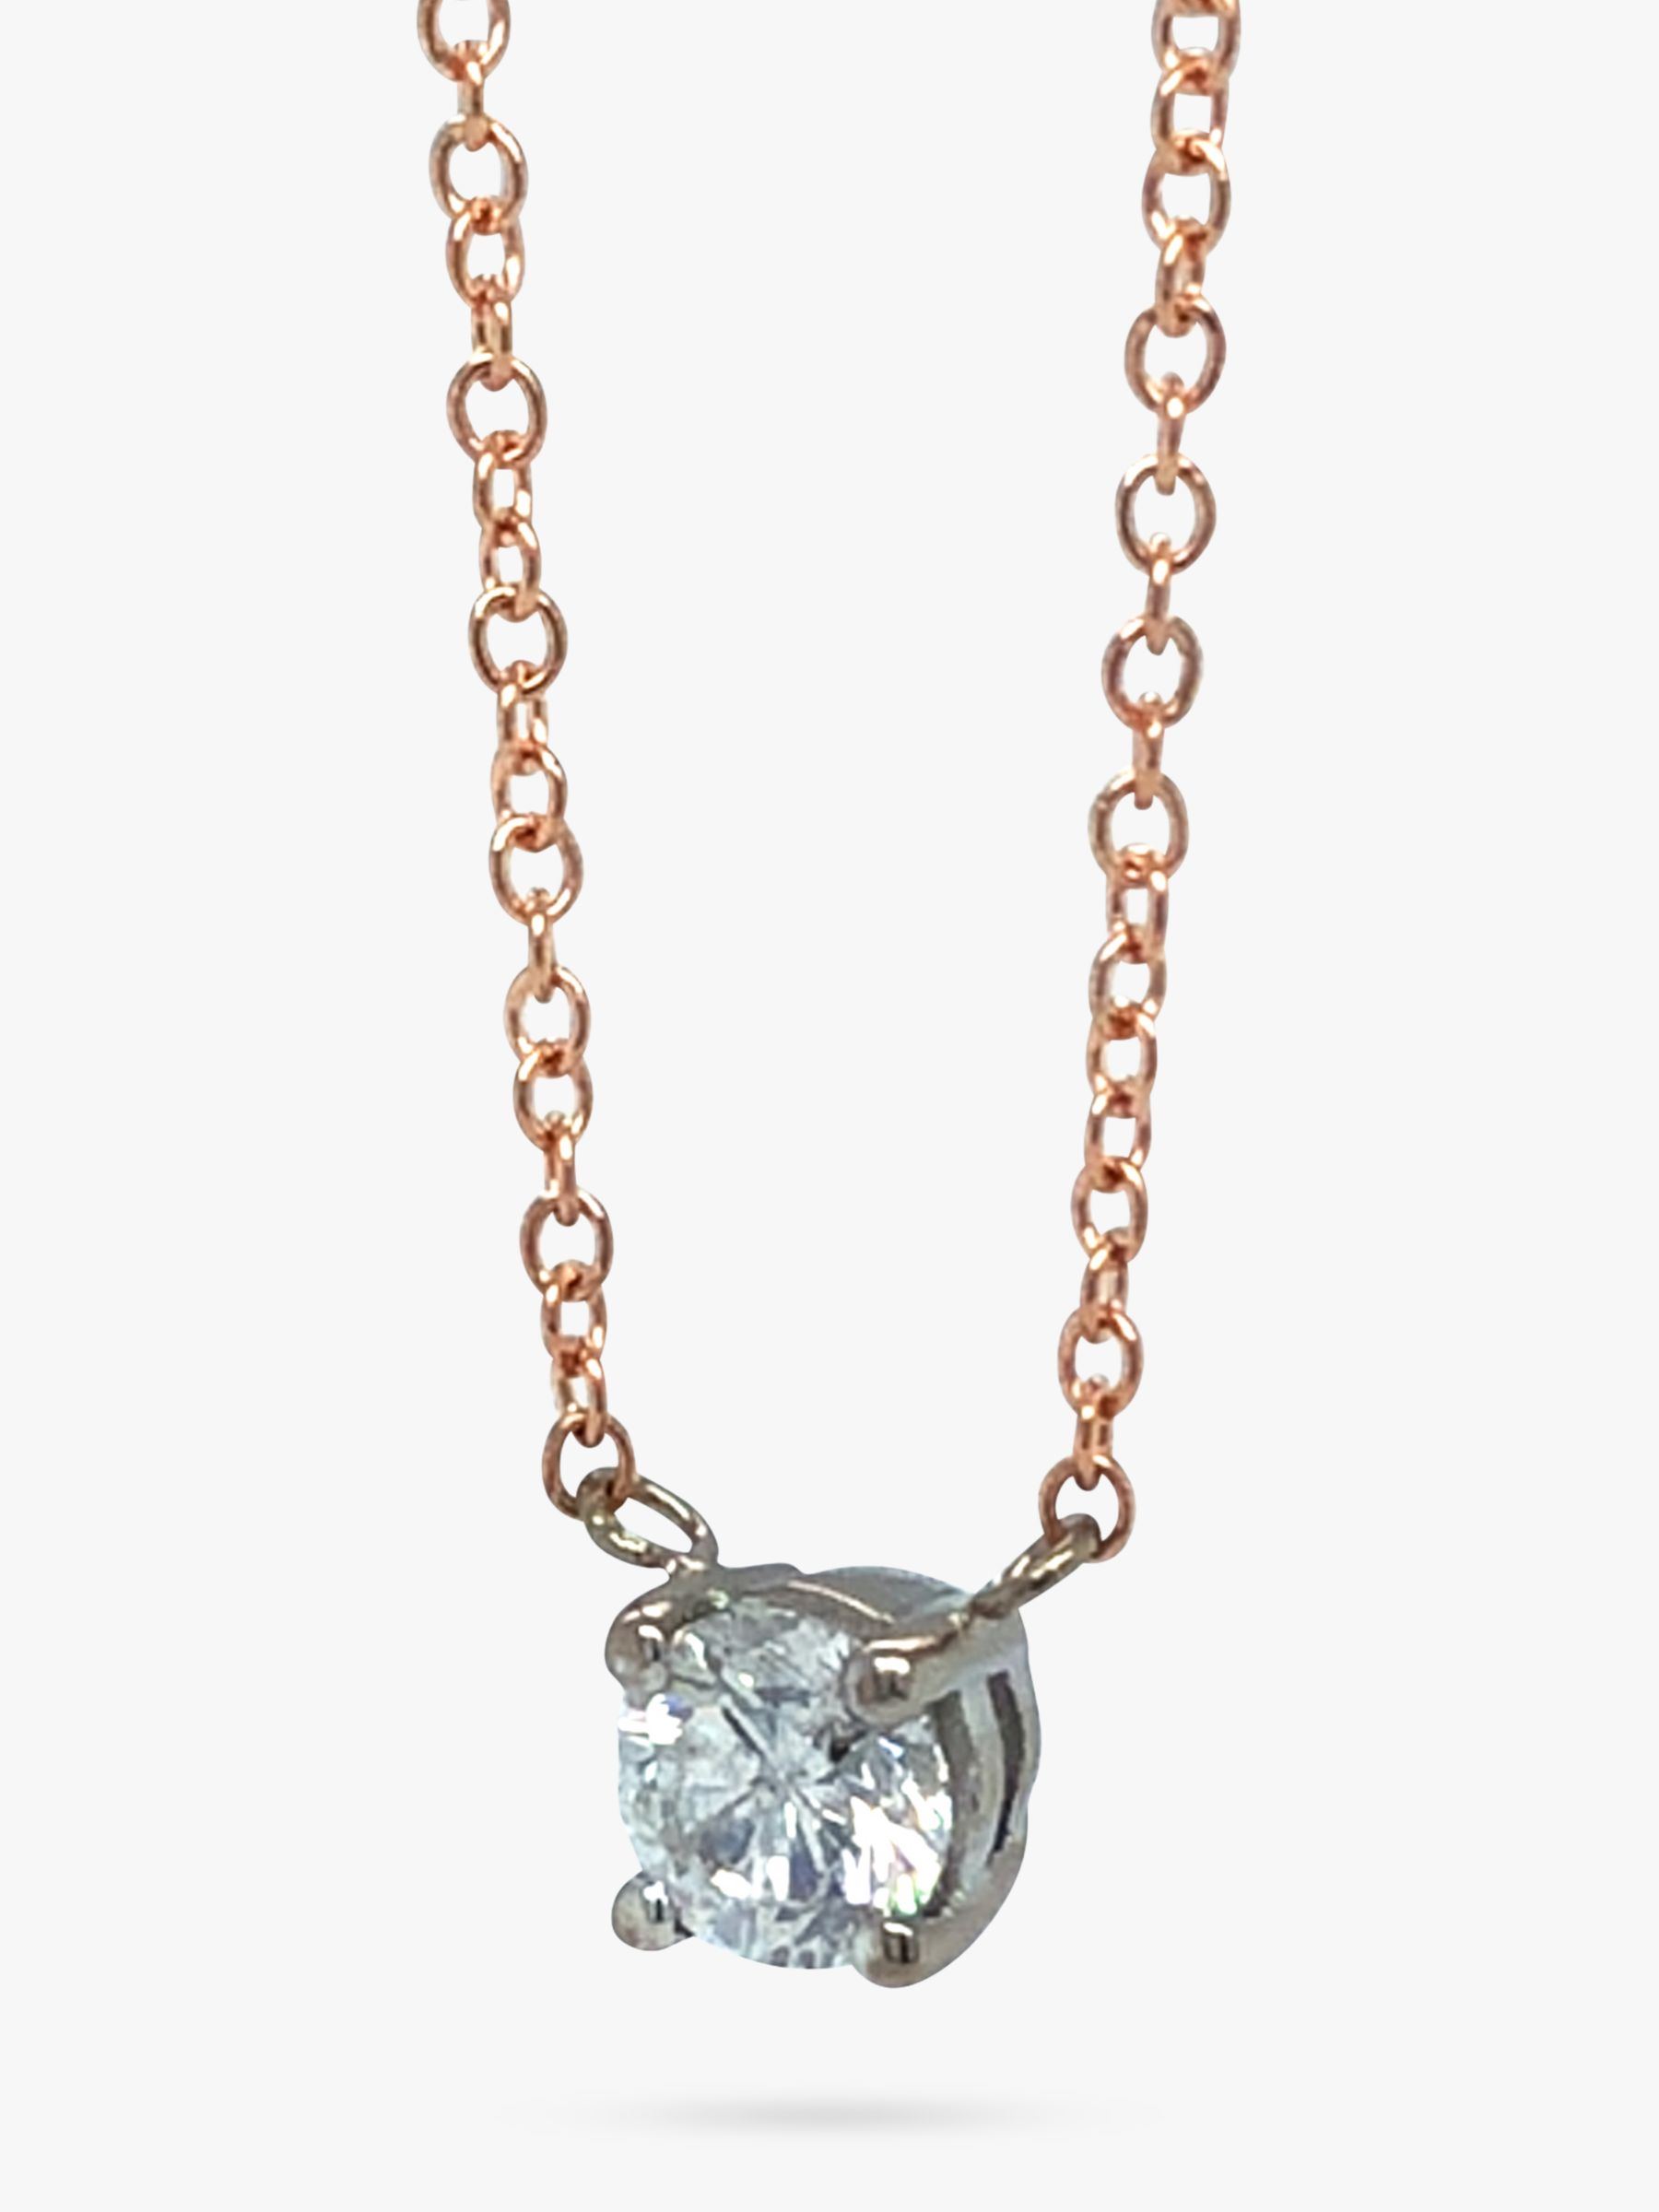 Buy Vintage Fine Jewellery Second Hand 18ct Rose & White Gold Diamond Pendant Necklace, Dated Circa 2000s Online at johnlewis.com